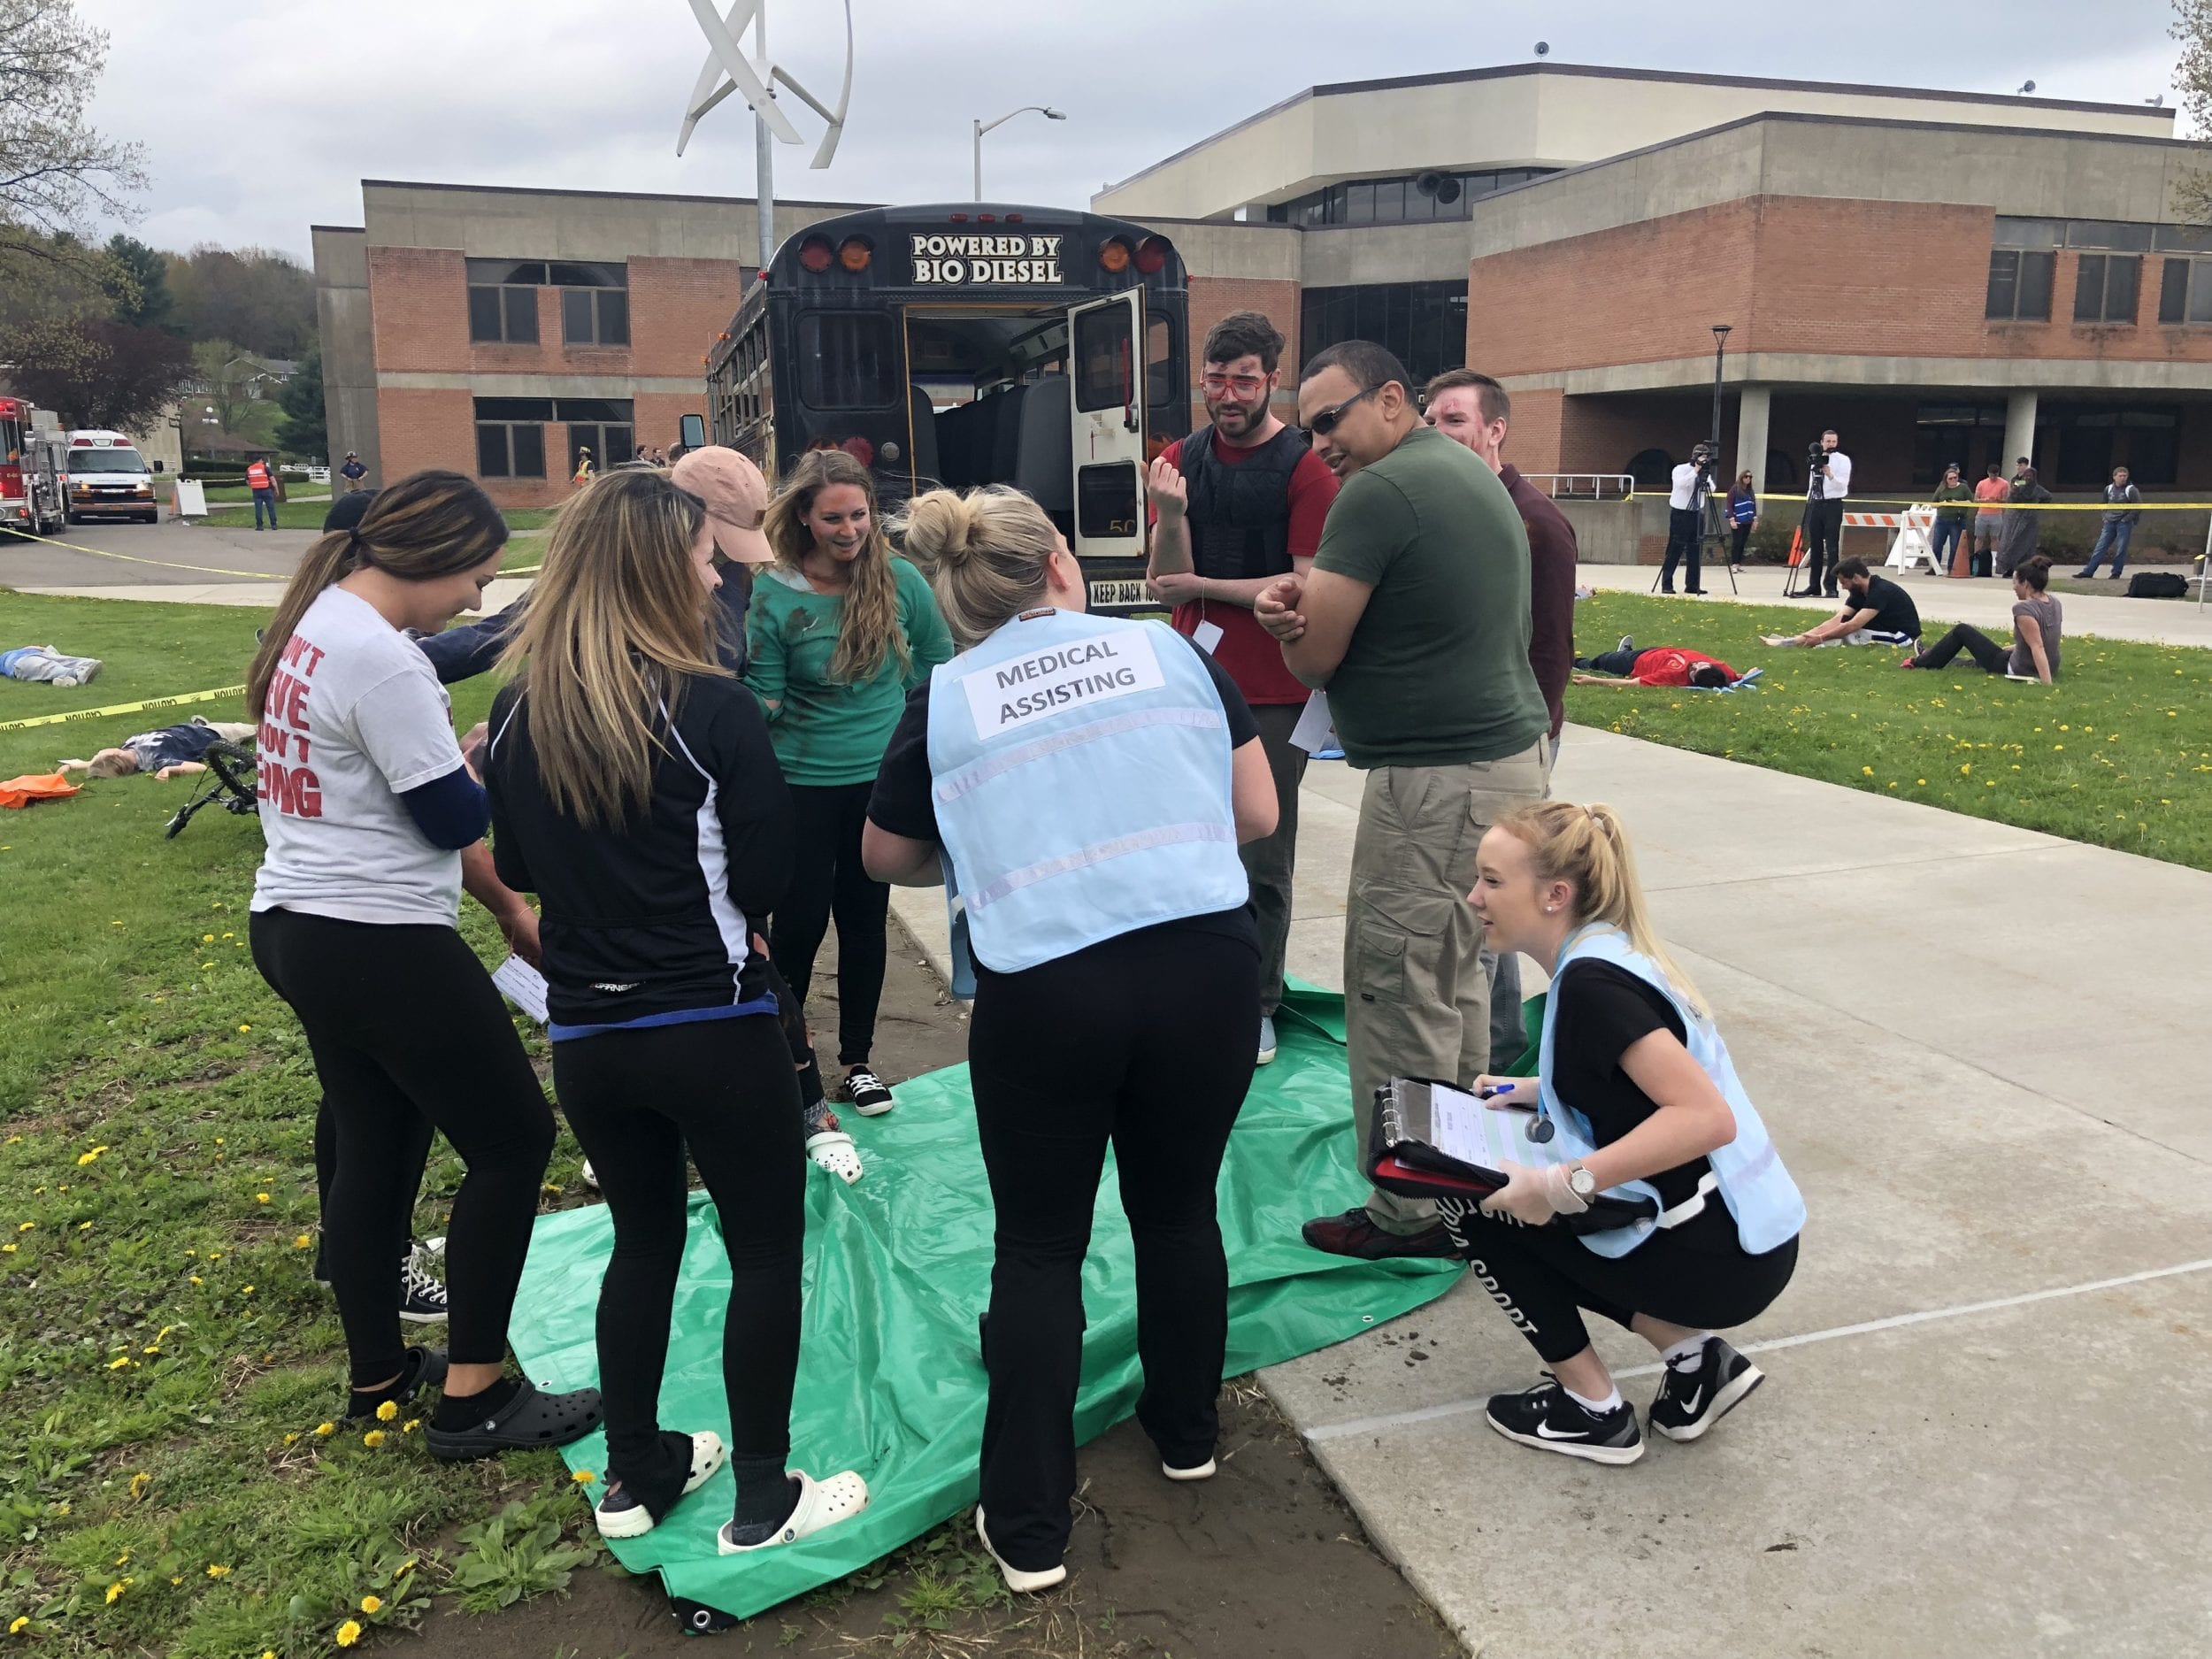 Medical Assisting students evaluate the walking wounded during the Mock Disaster